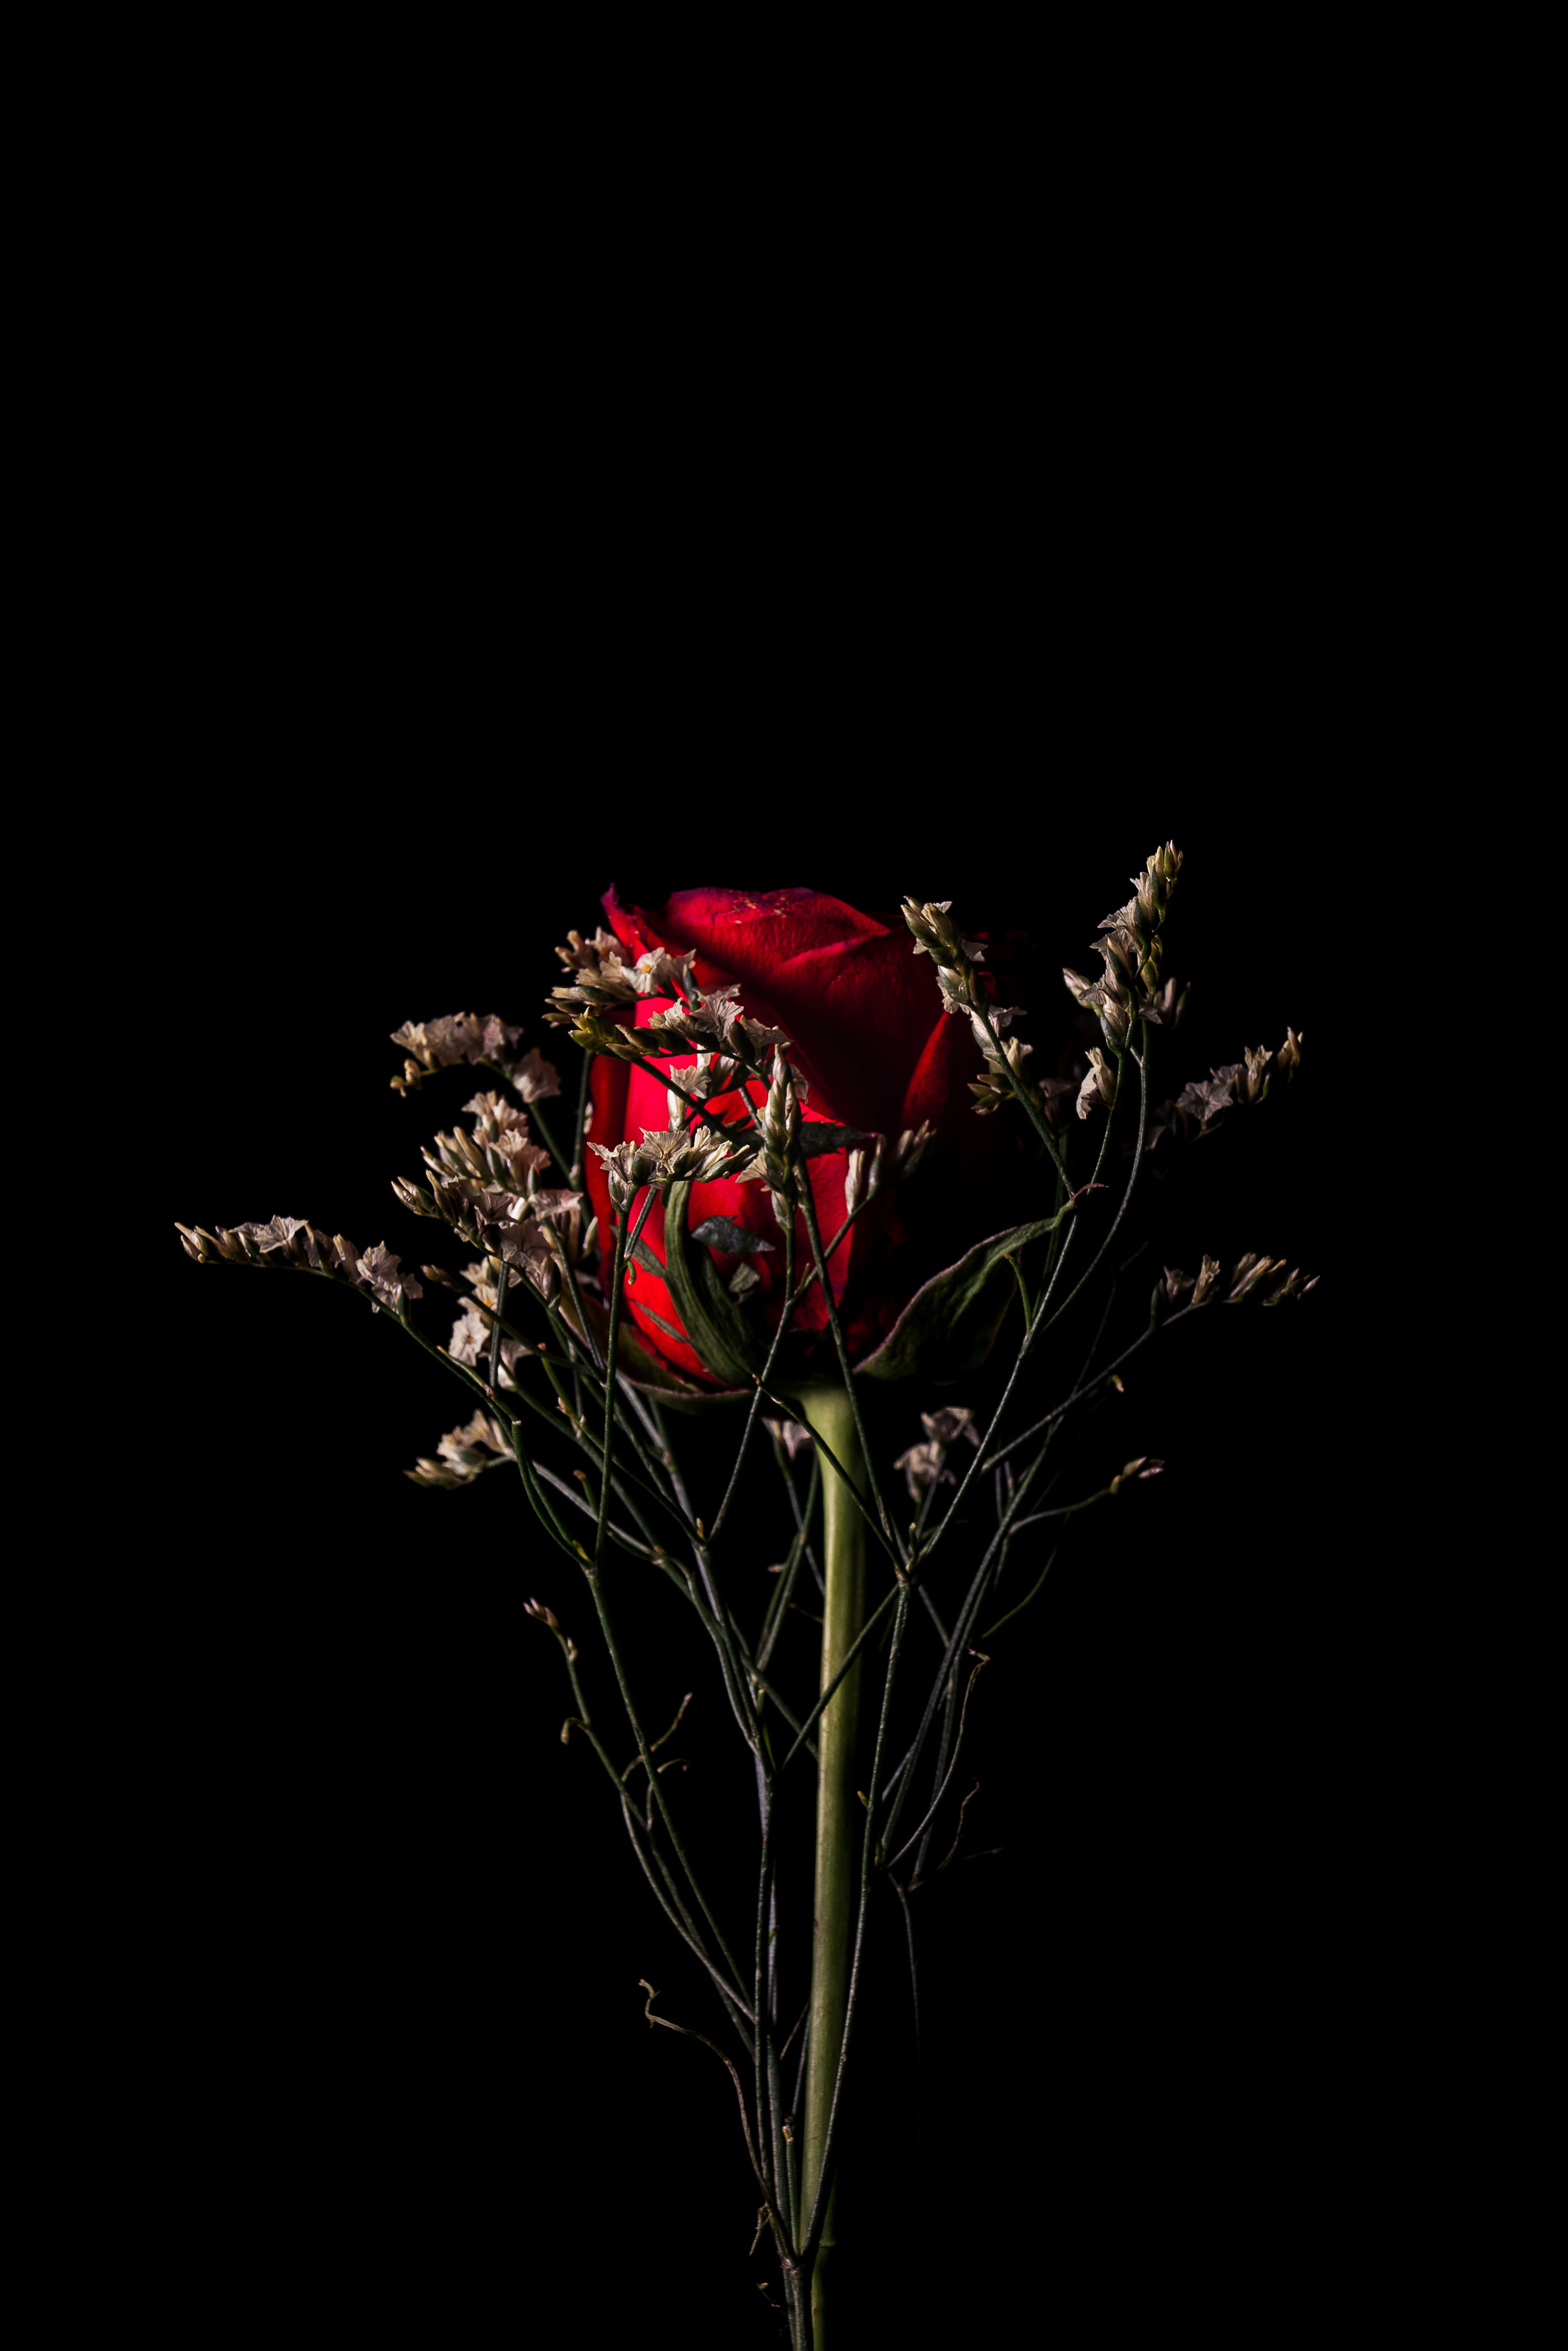 red rose behind white flowers in black background, plant, flowering plant